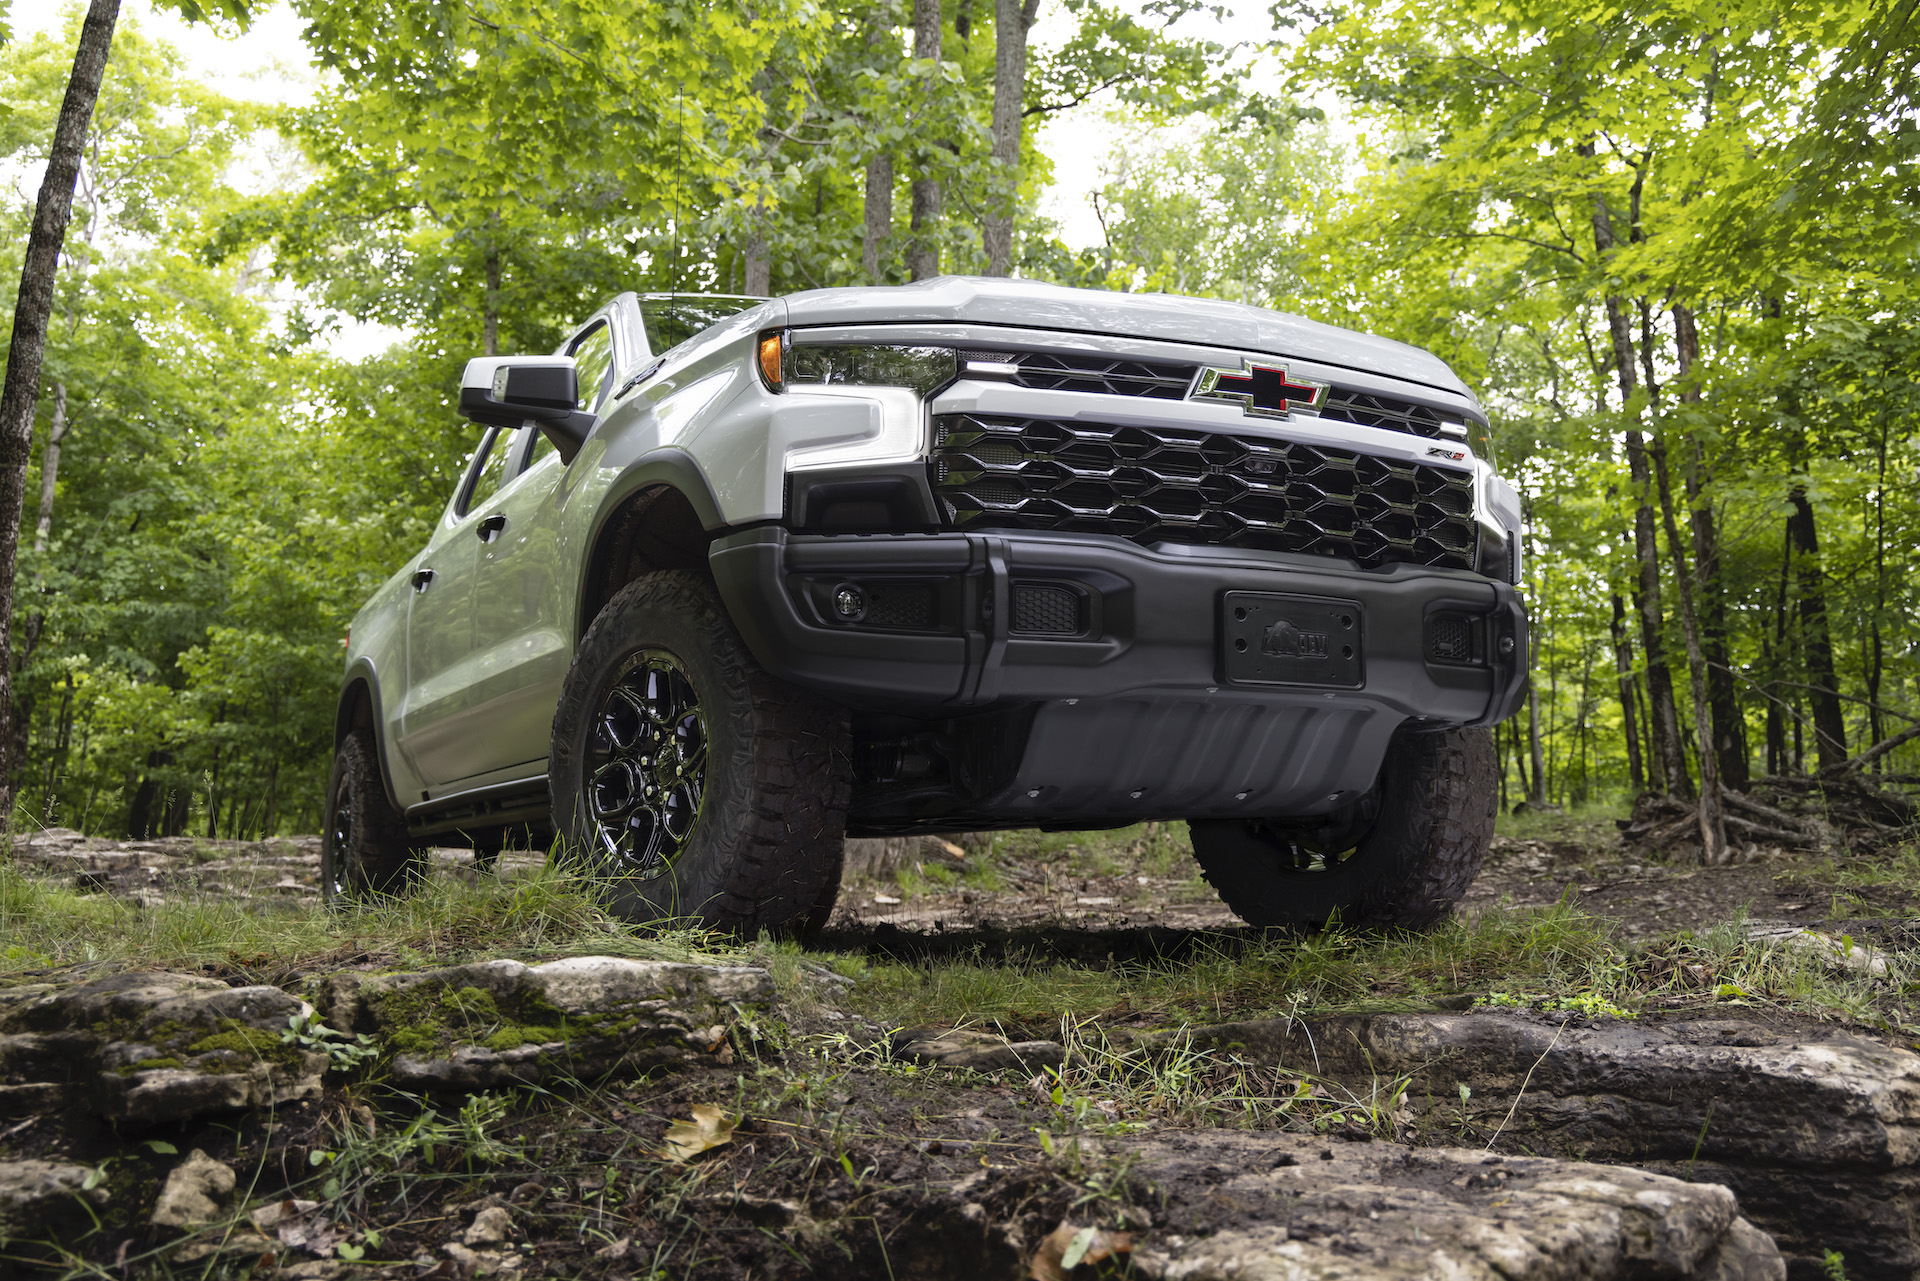 2023 Chevrolet Silverado 1500 ZR2 Bison adds even more offroad prowess